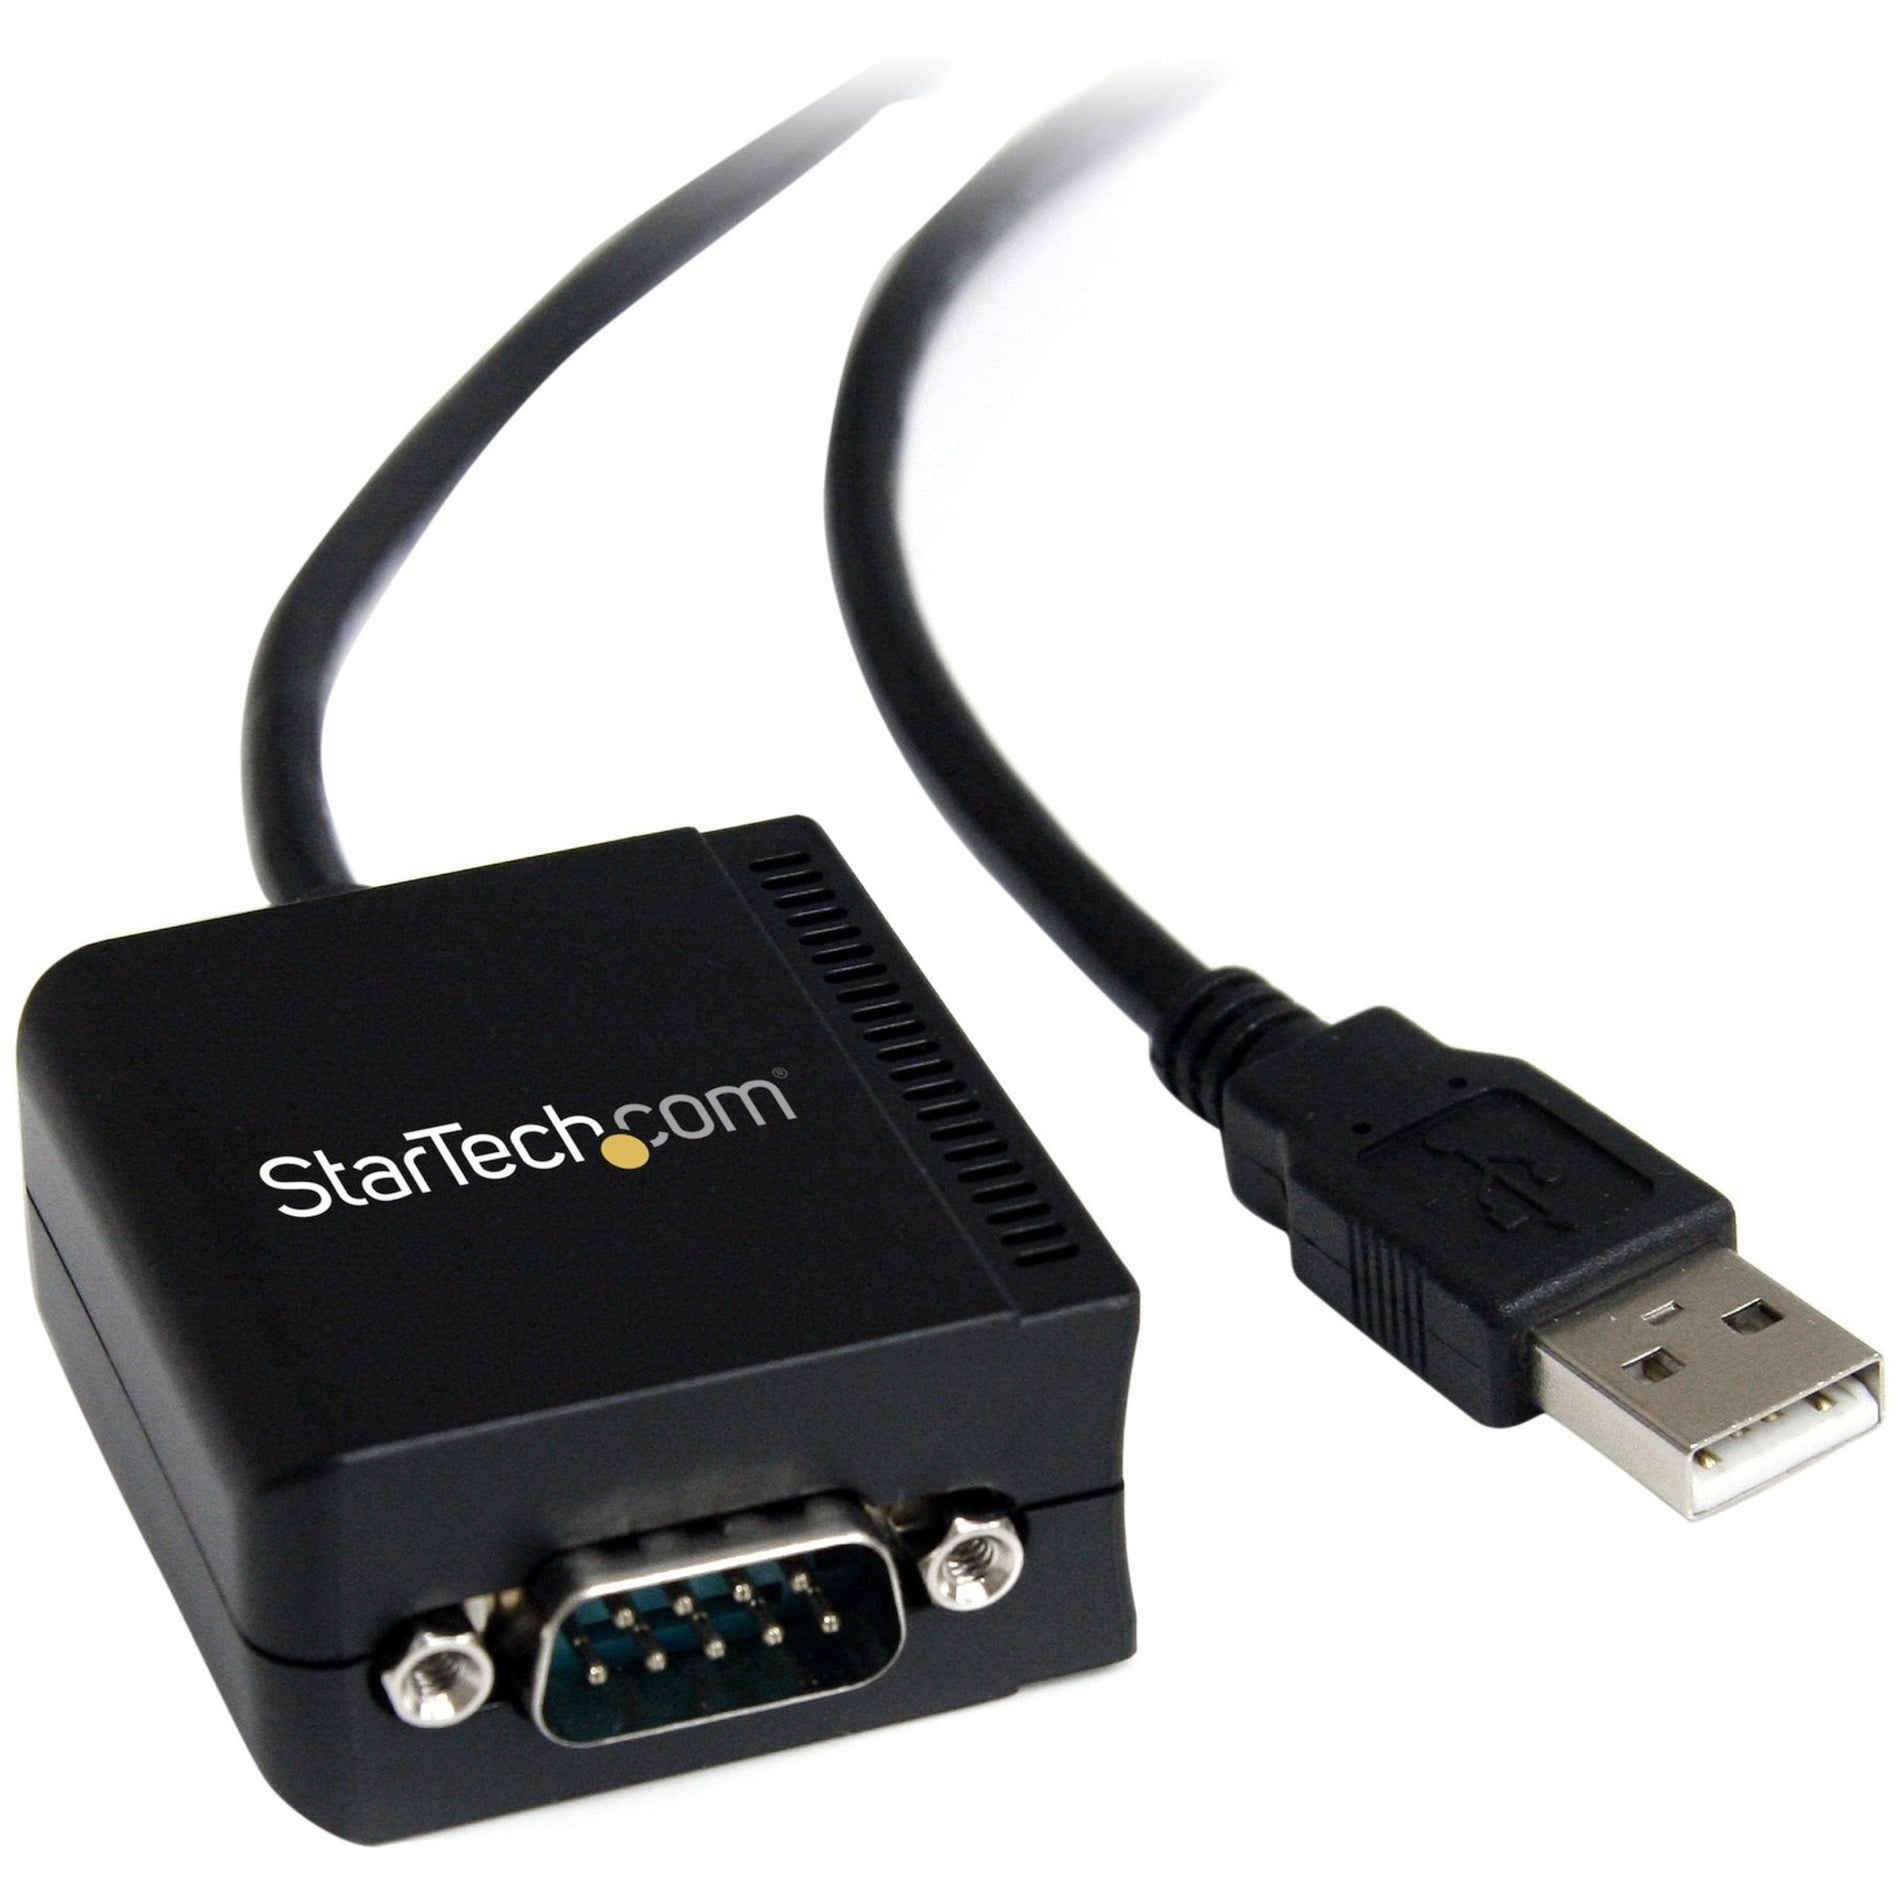 StarTech.com ICUSB2321FIS 1 Port FTDI USB to Serial RS232 Adapter Cable with Isolation Surge Protection 8.20 ft Cable Length Black